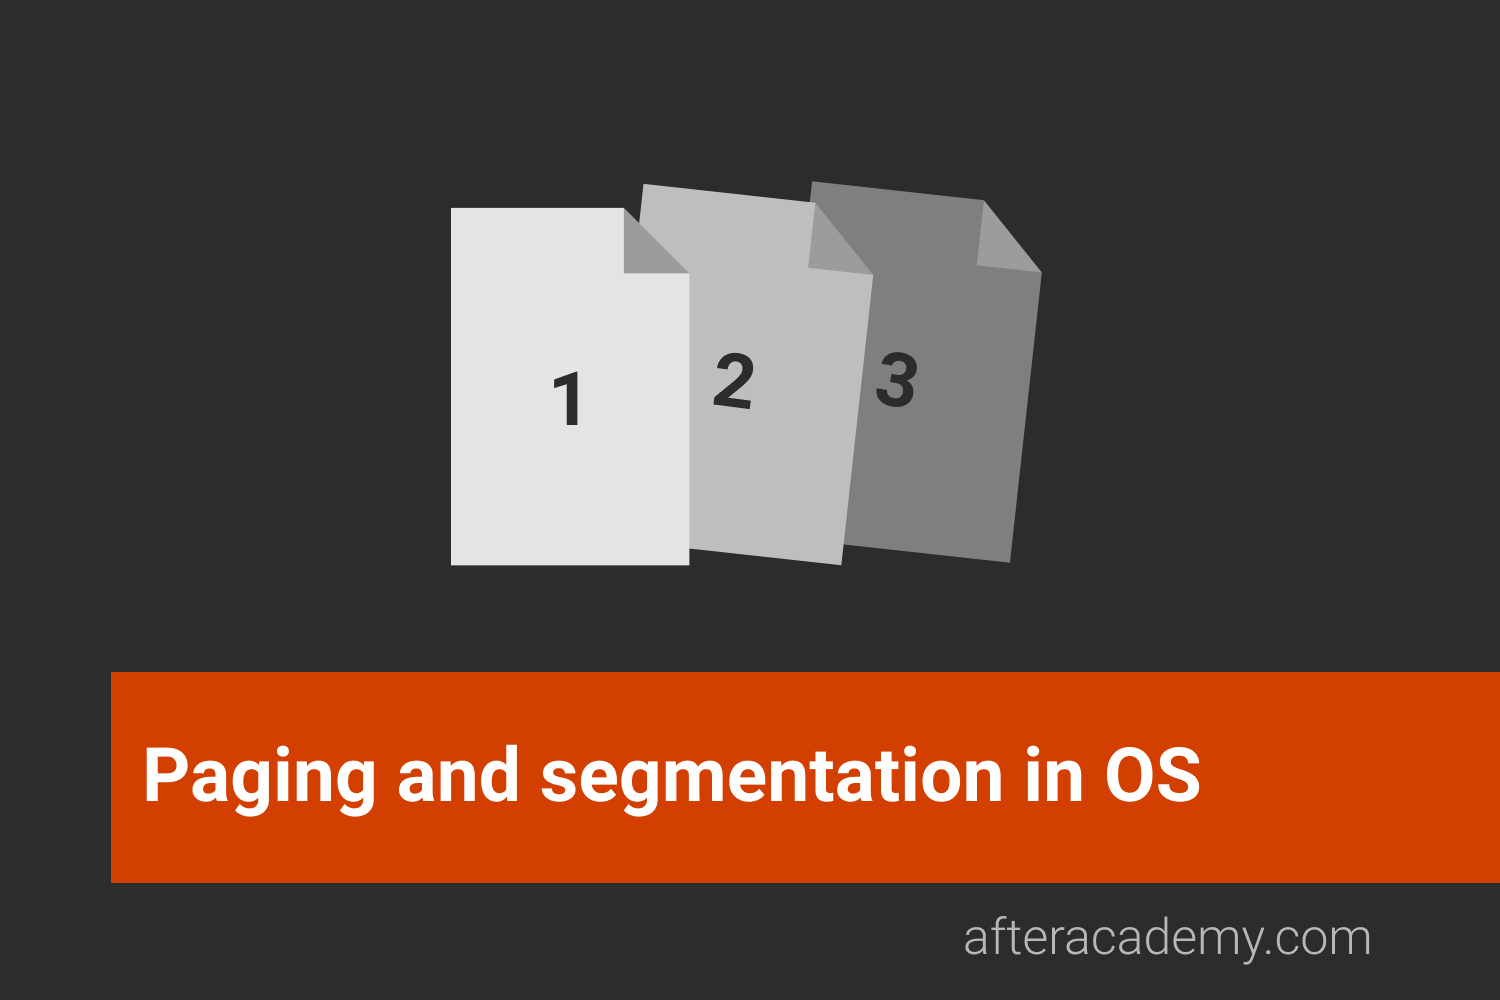 What are Paging and Segmentation?